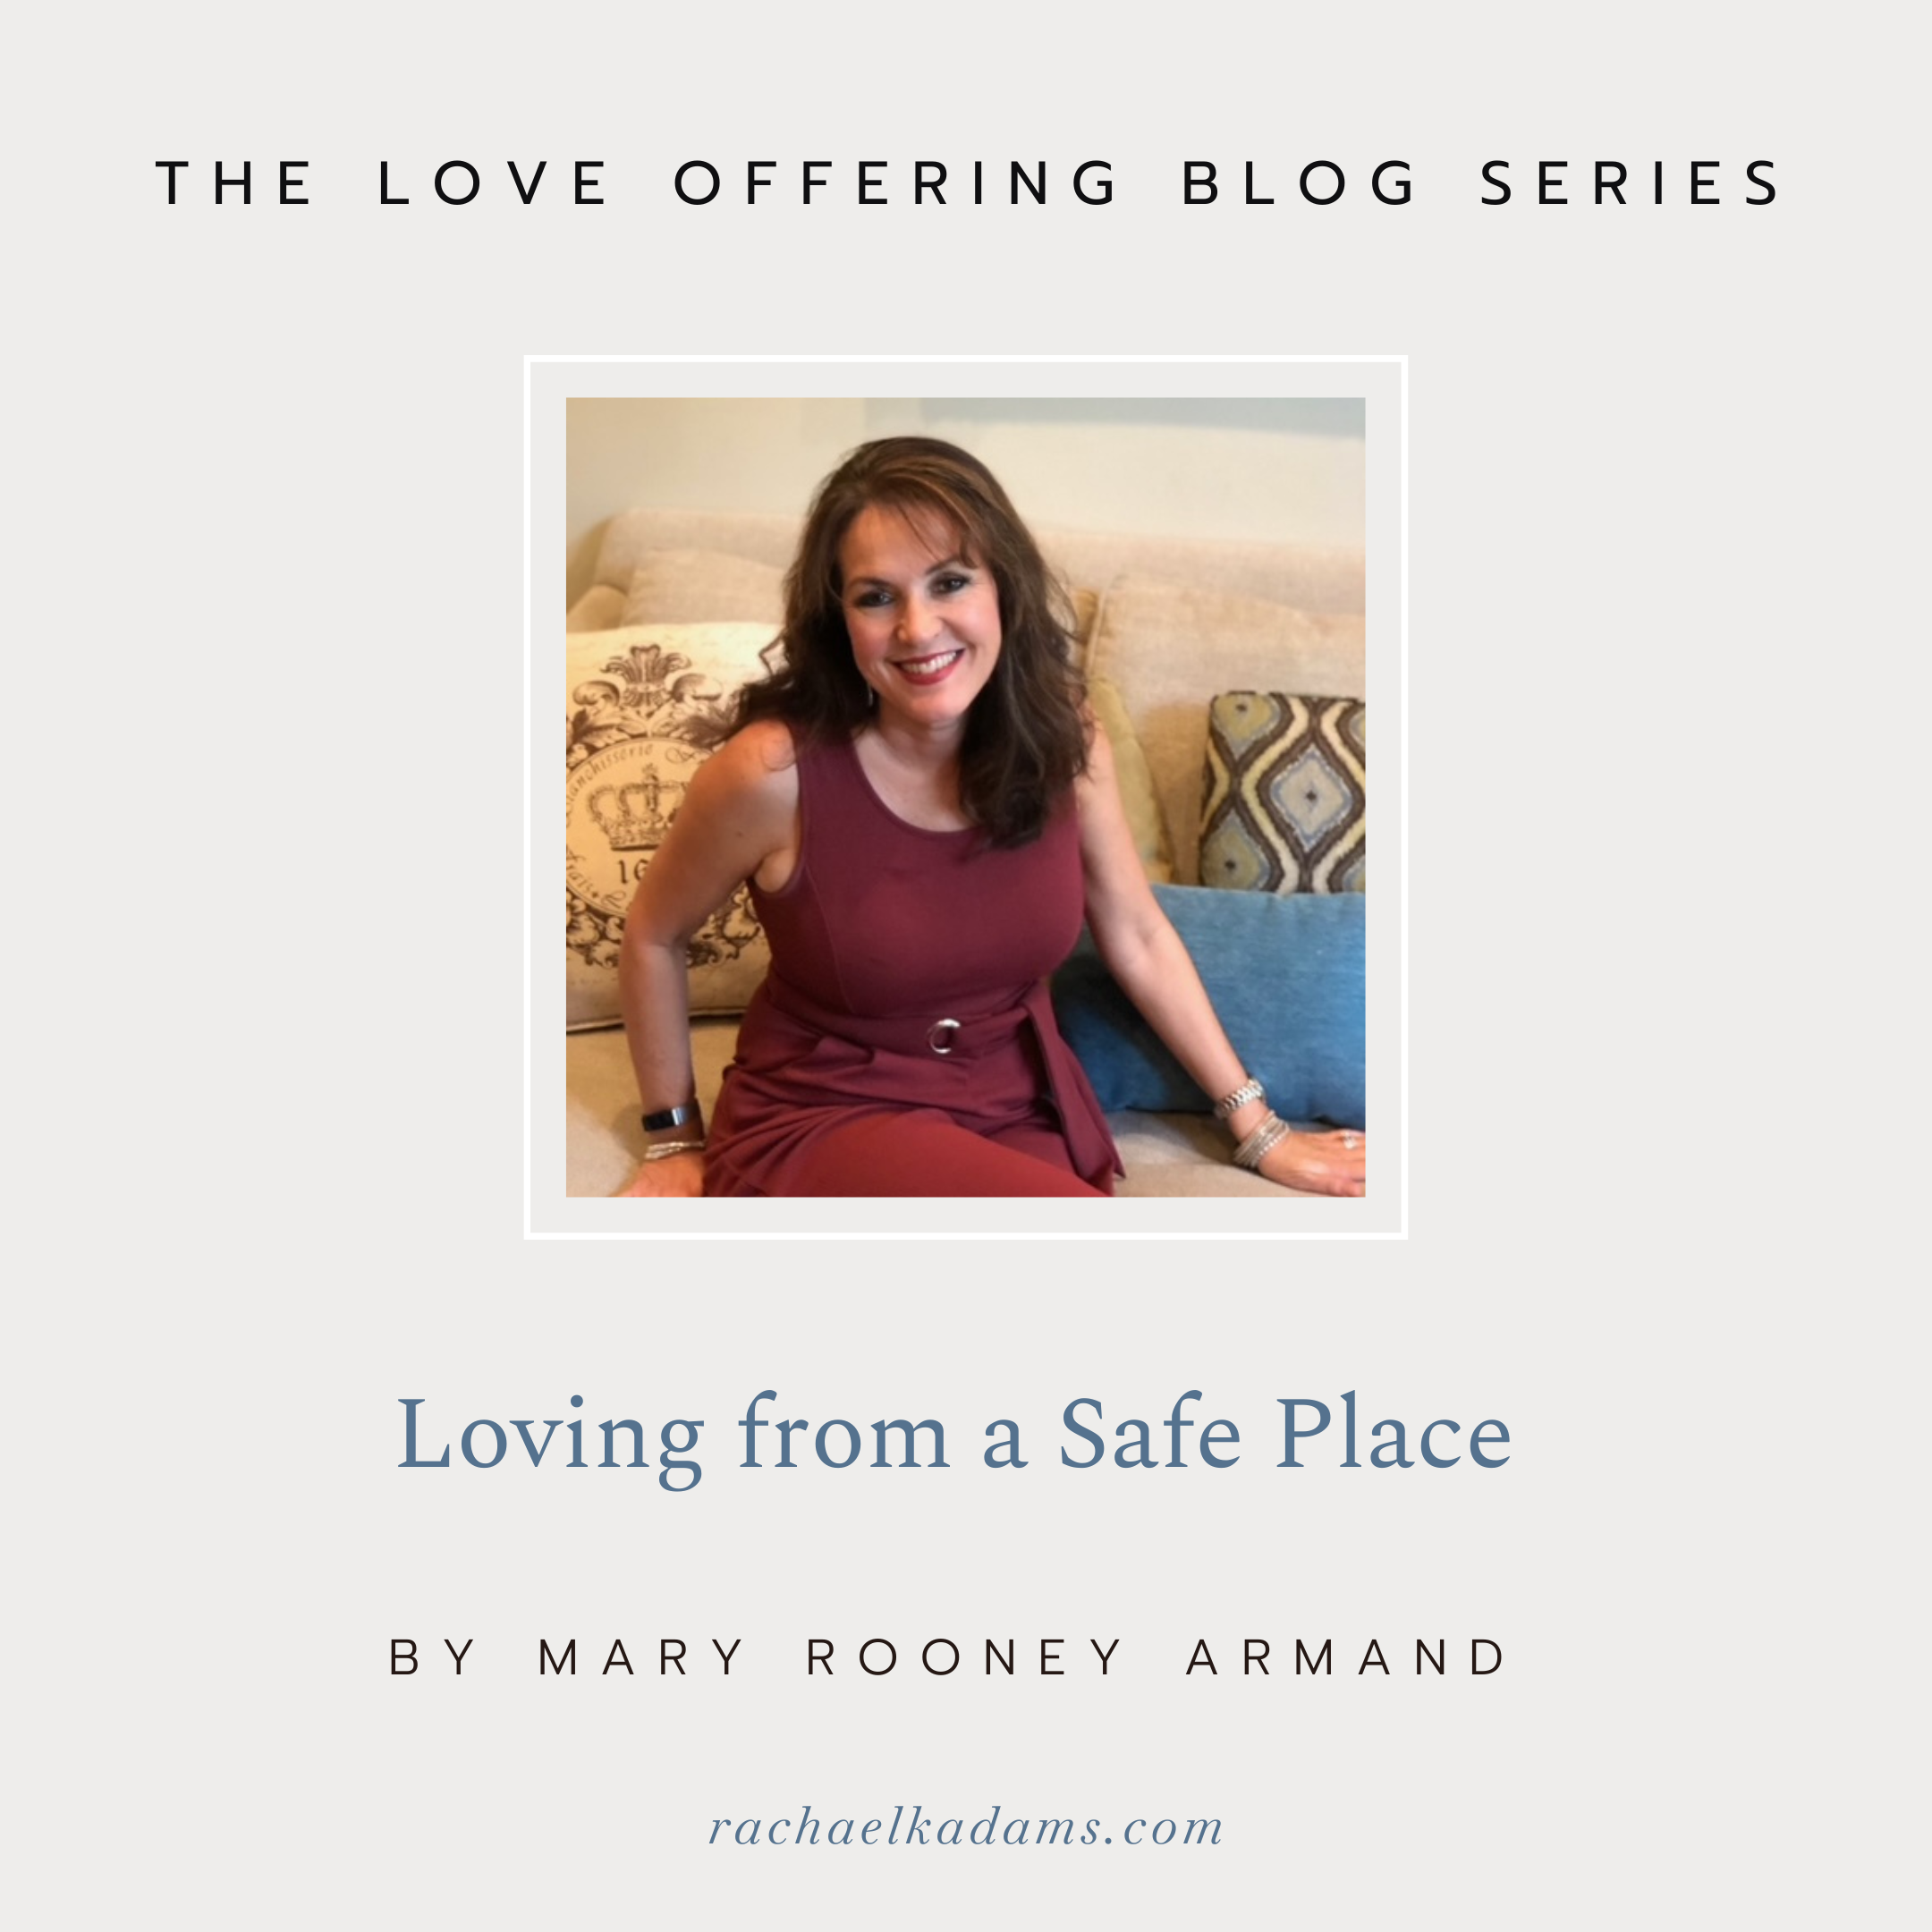 Loving from a Safe Place by Mary Rooney Armand